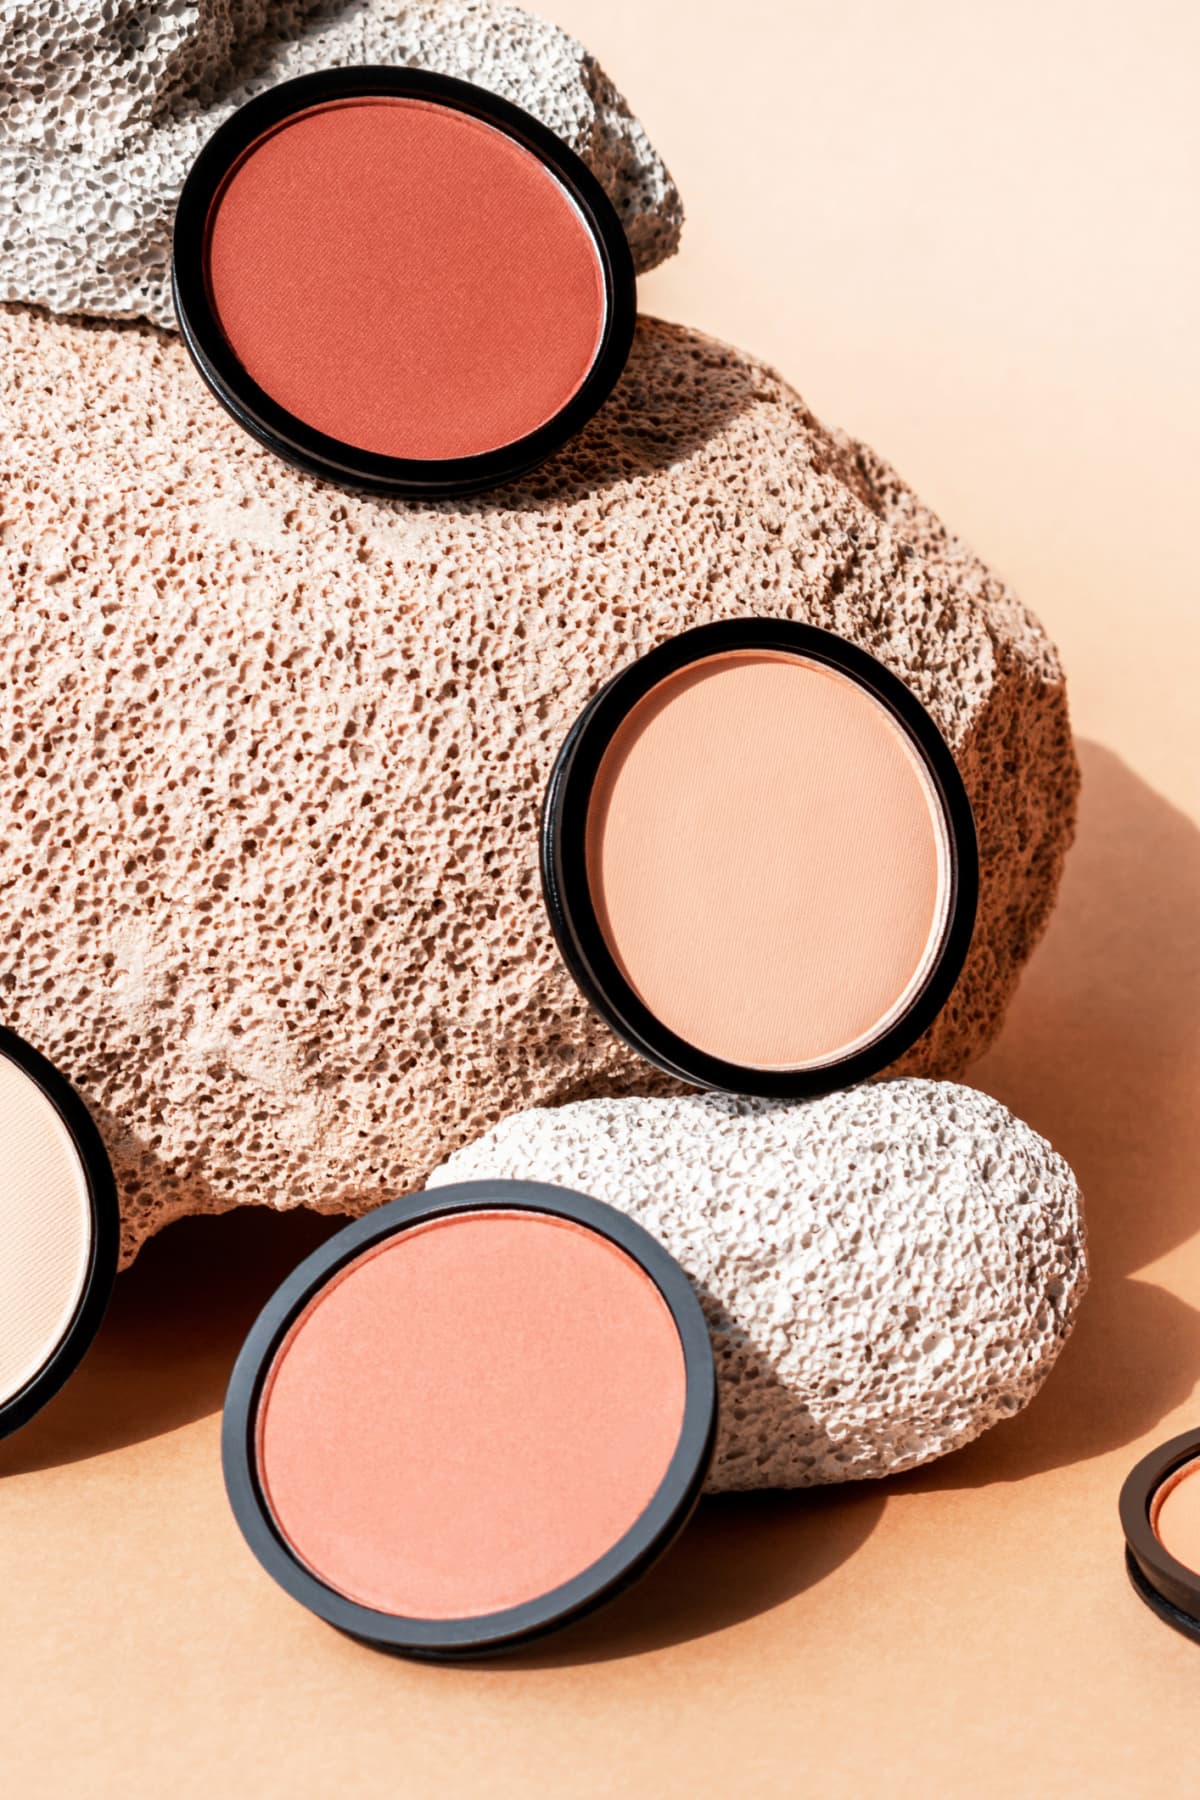 Compact face powder, blush and eyeshadow on beige background with porous stones. Vertical. Cosmetics for contouring.